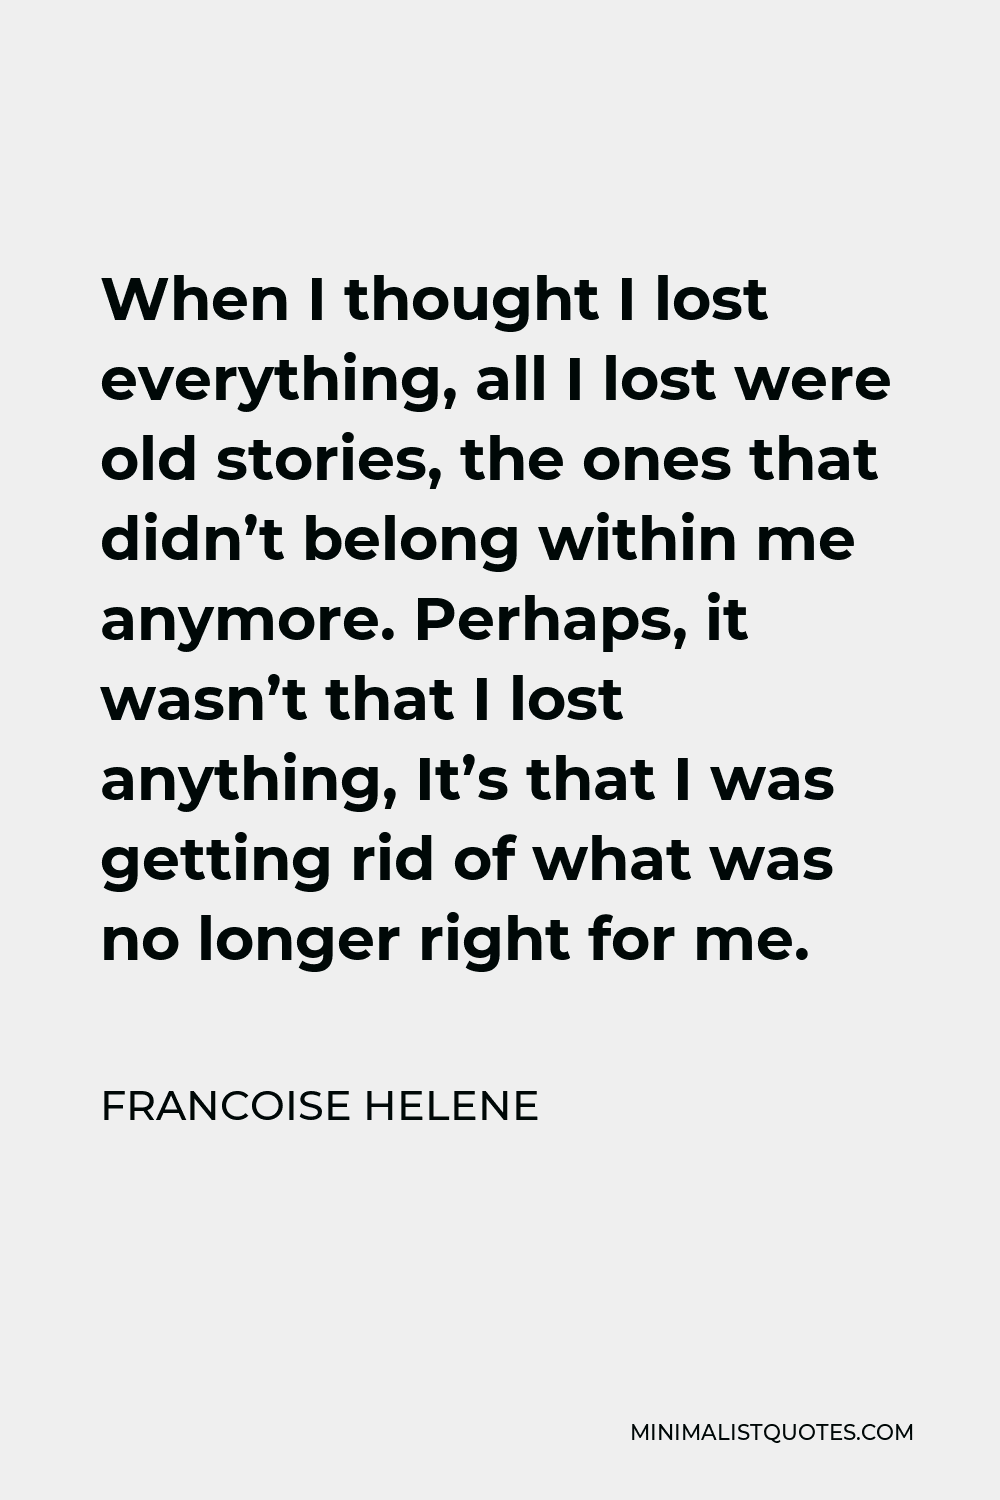 Francoise Helene Quote - When I thought I lost everything, all I lost were old stories, the ones that didn’t belong within me anymore. Perhaps, it wasn’t that I lost anything, It’s that I was getting rid of what was no longer right for me.